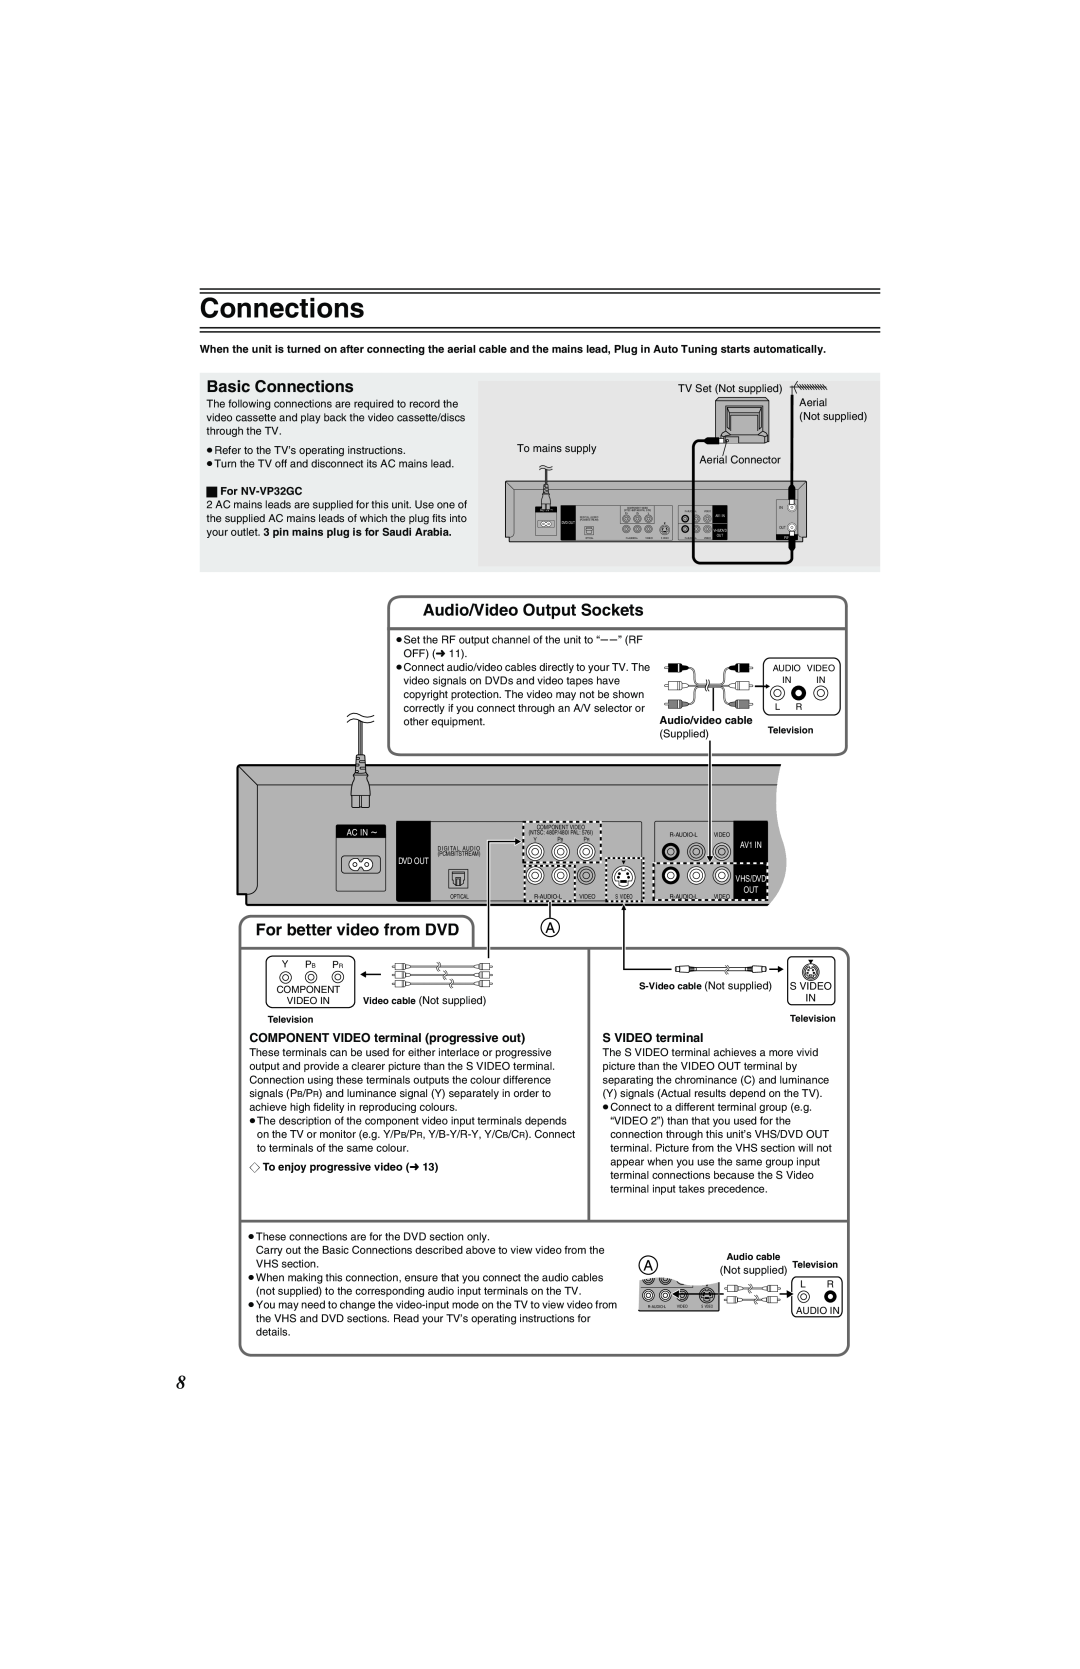 Panasonic NV-VP32 Series Basic Connections, Audio/Video Output Sockets, For better video from DVD, ª For NV-VP32GC 